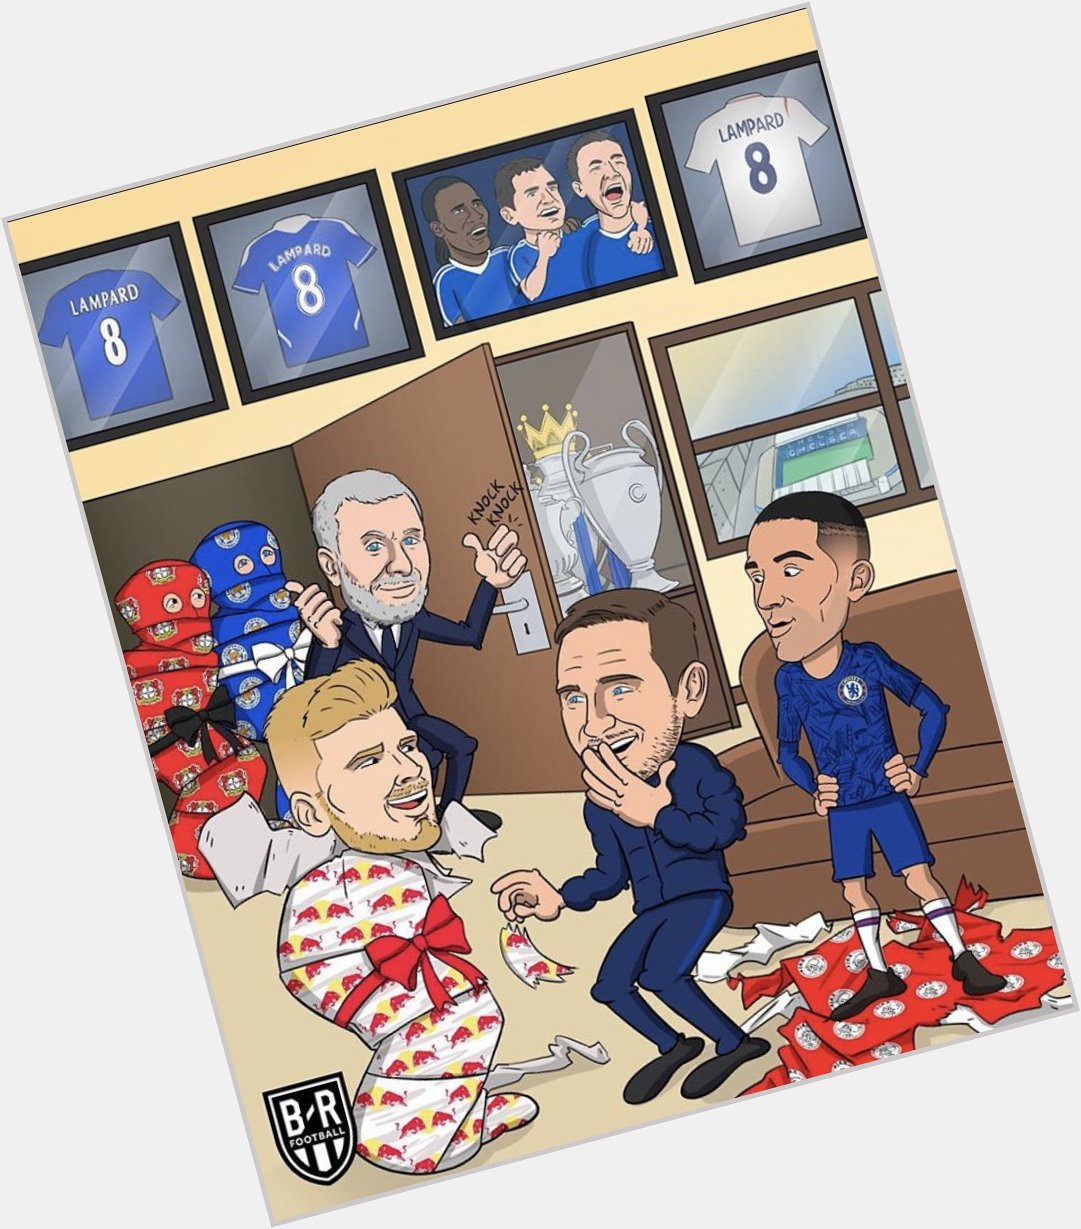 Happy Birthday Frank Lampard! Love this illustration from 